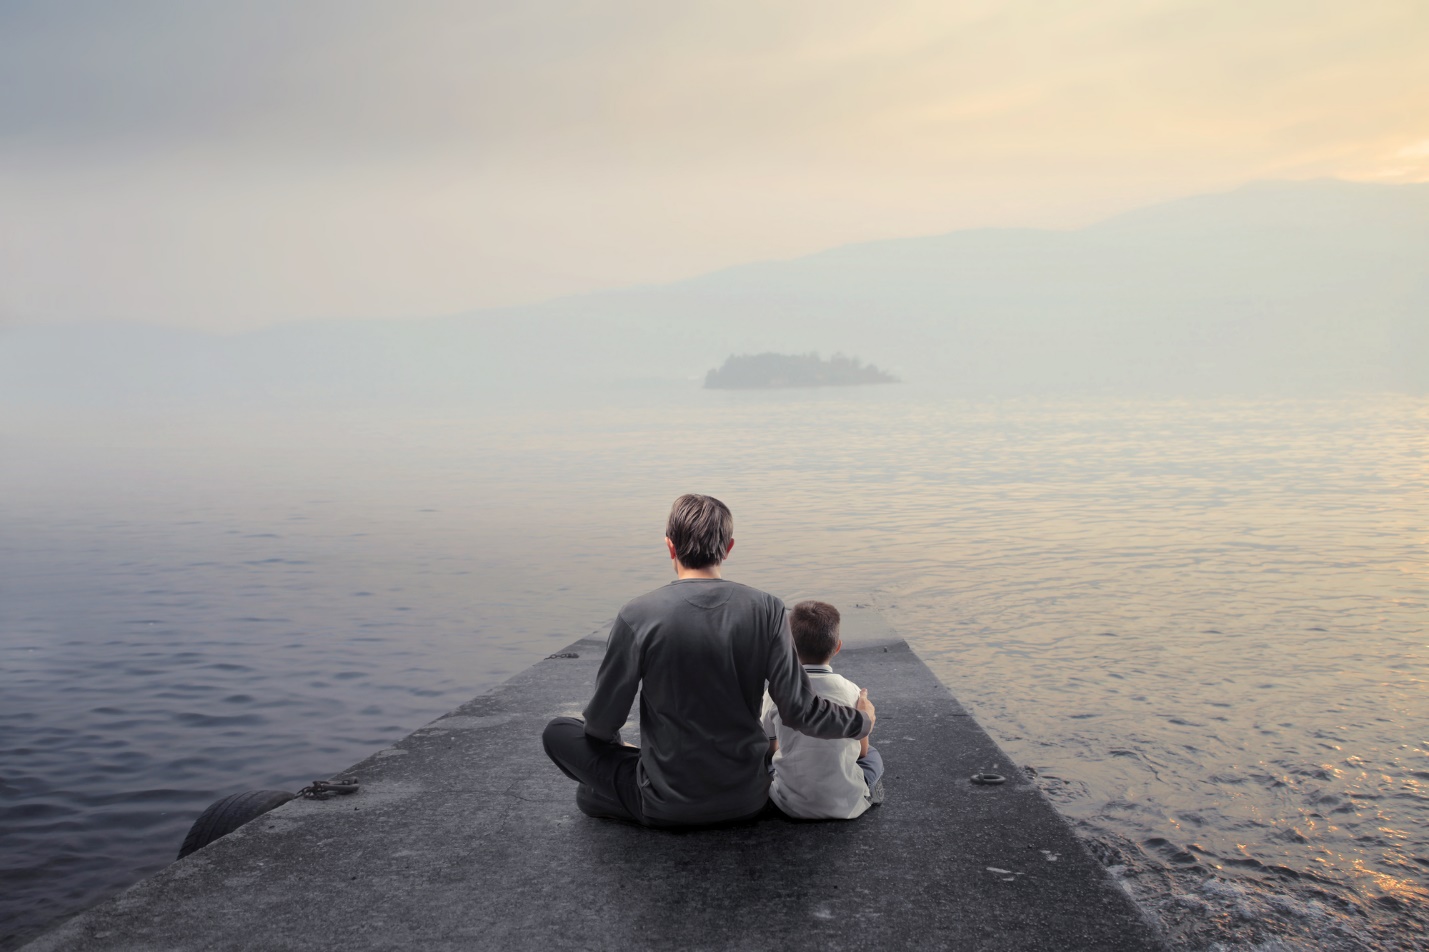 A person and a child sitting on a rock overlooking the ocean

Description automatically generated with low confidence